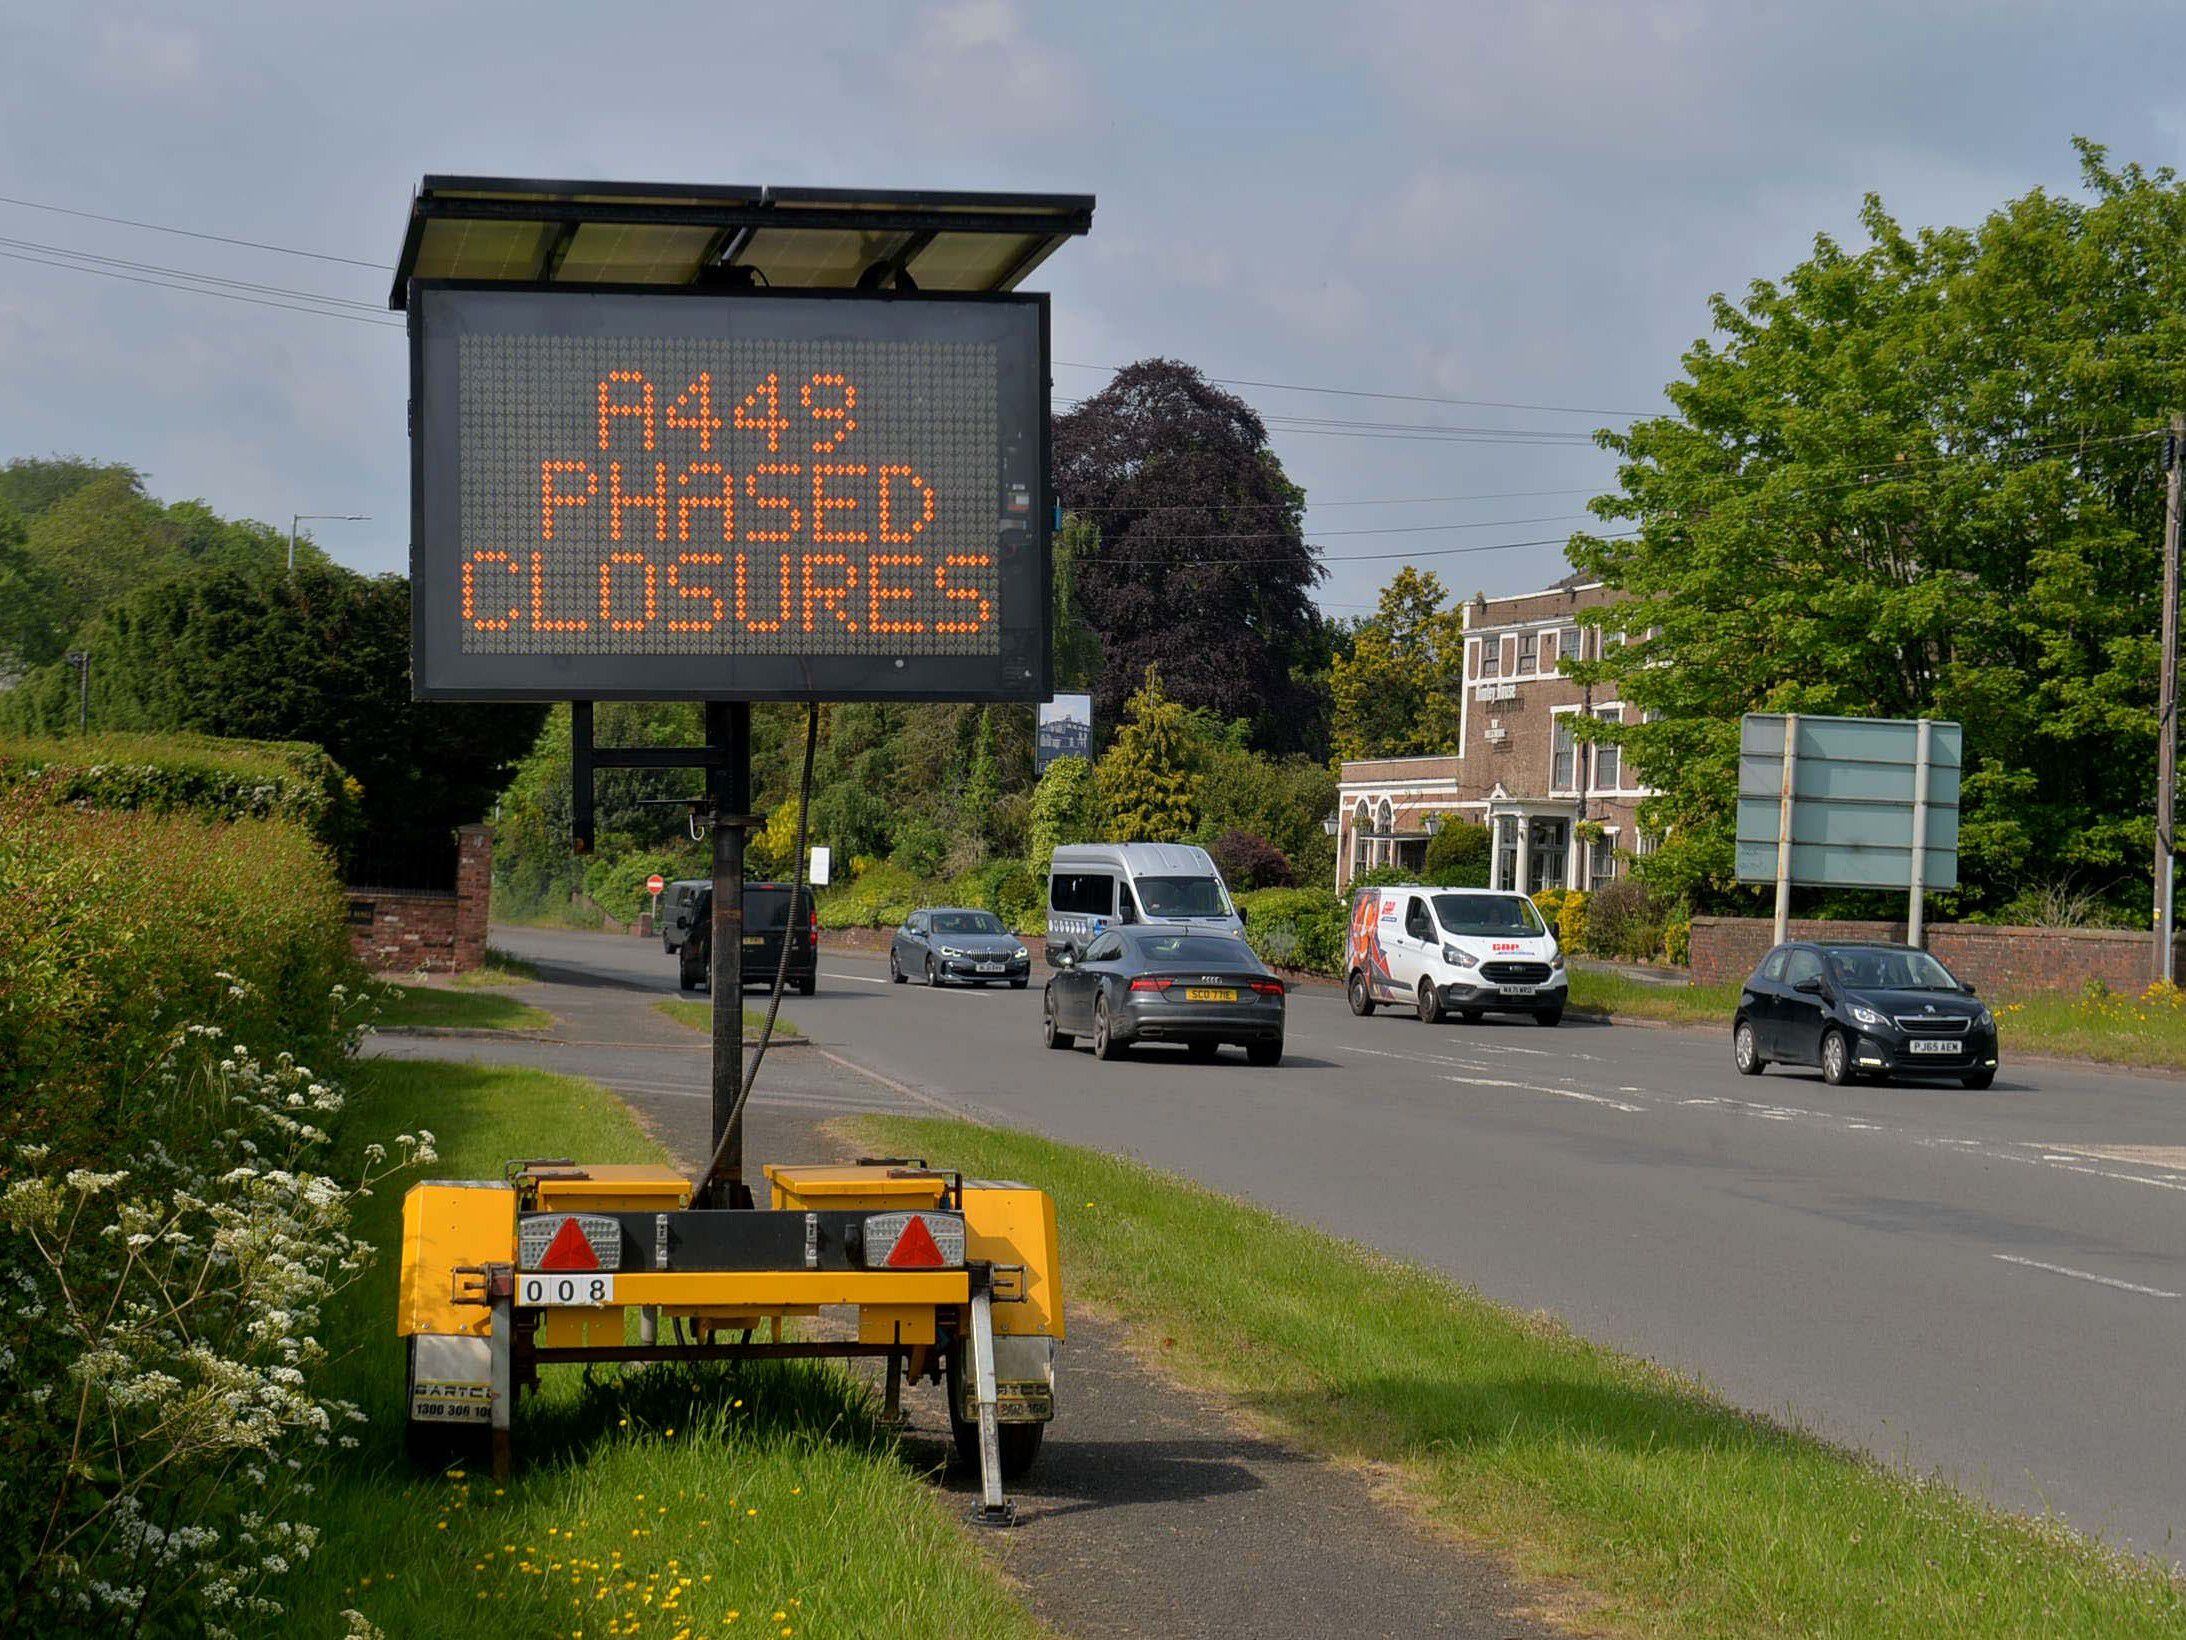 Traffic moving well on A449 despite threat of roadworks